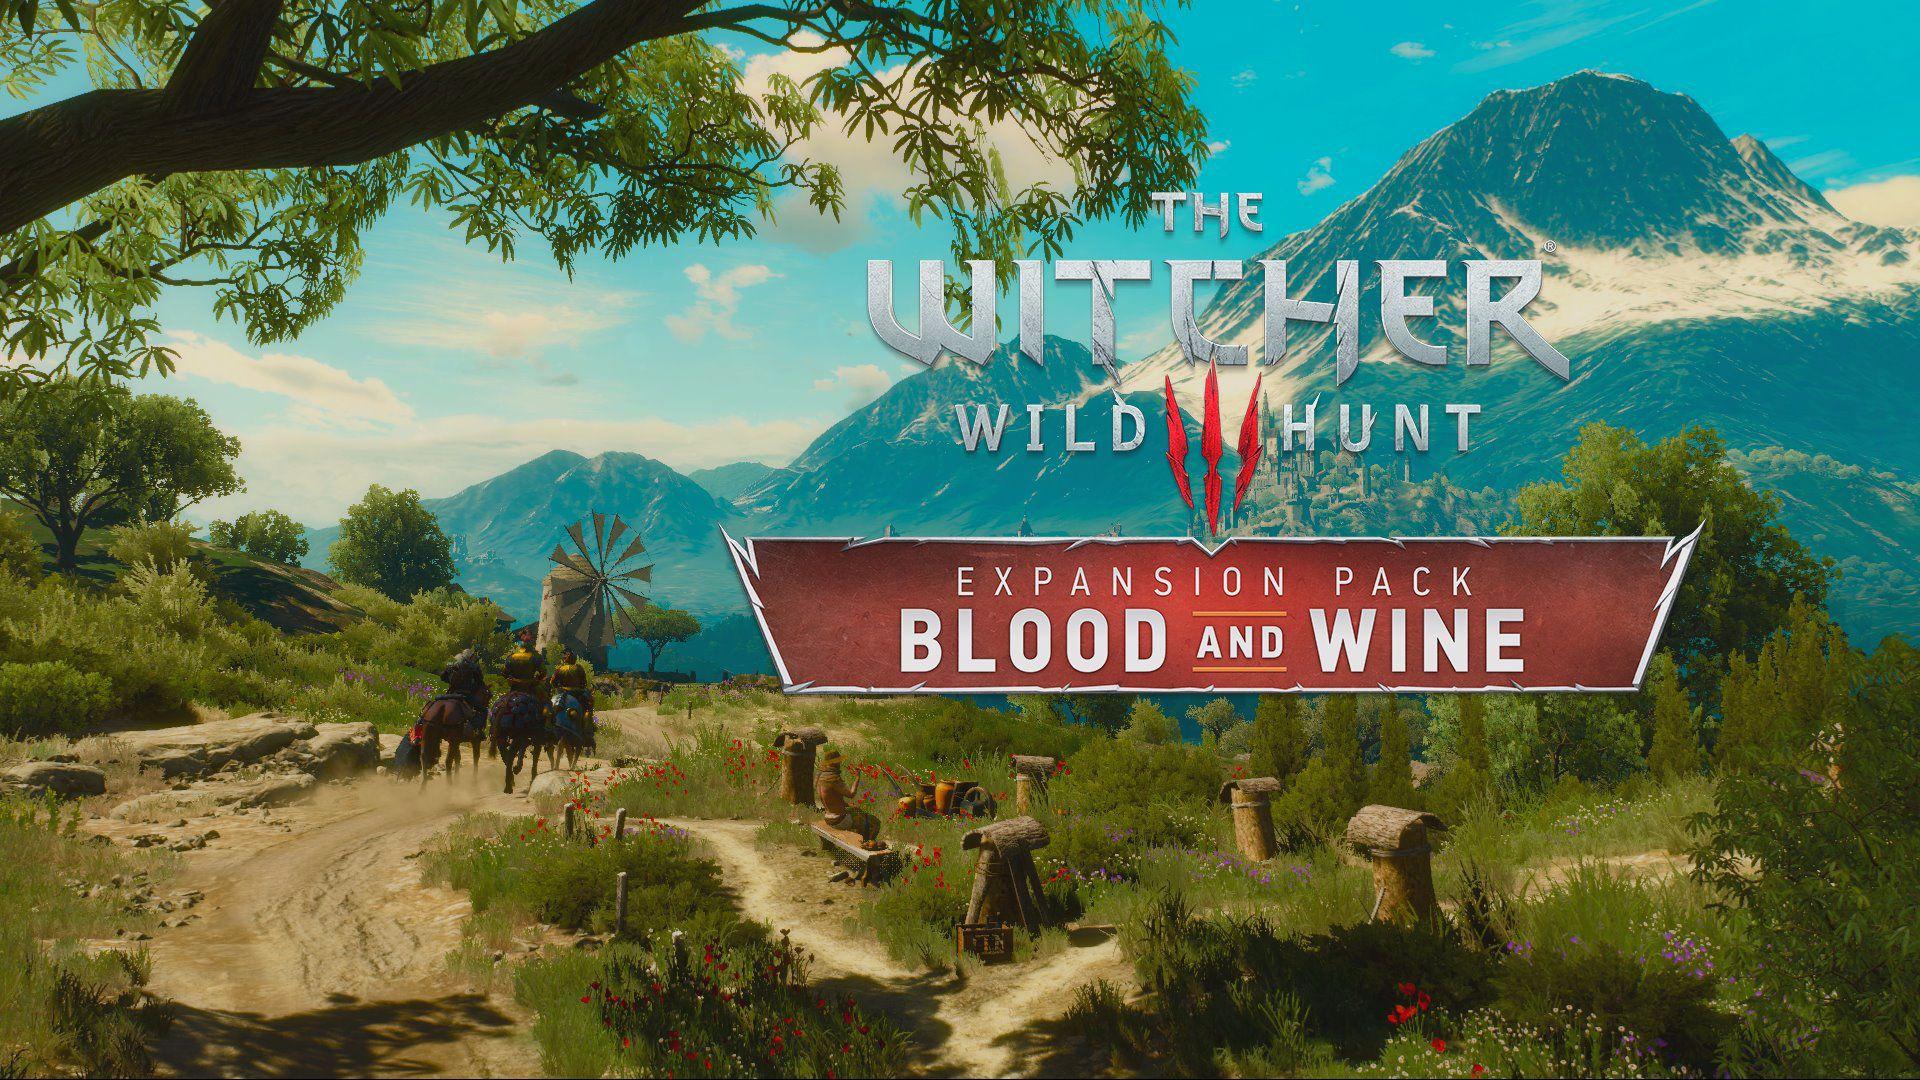 The Witcher, Wild Hunt Blood And Wine HD Wallpaper 1920